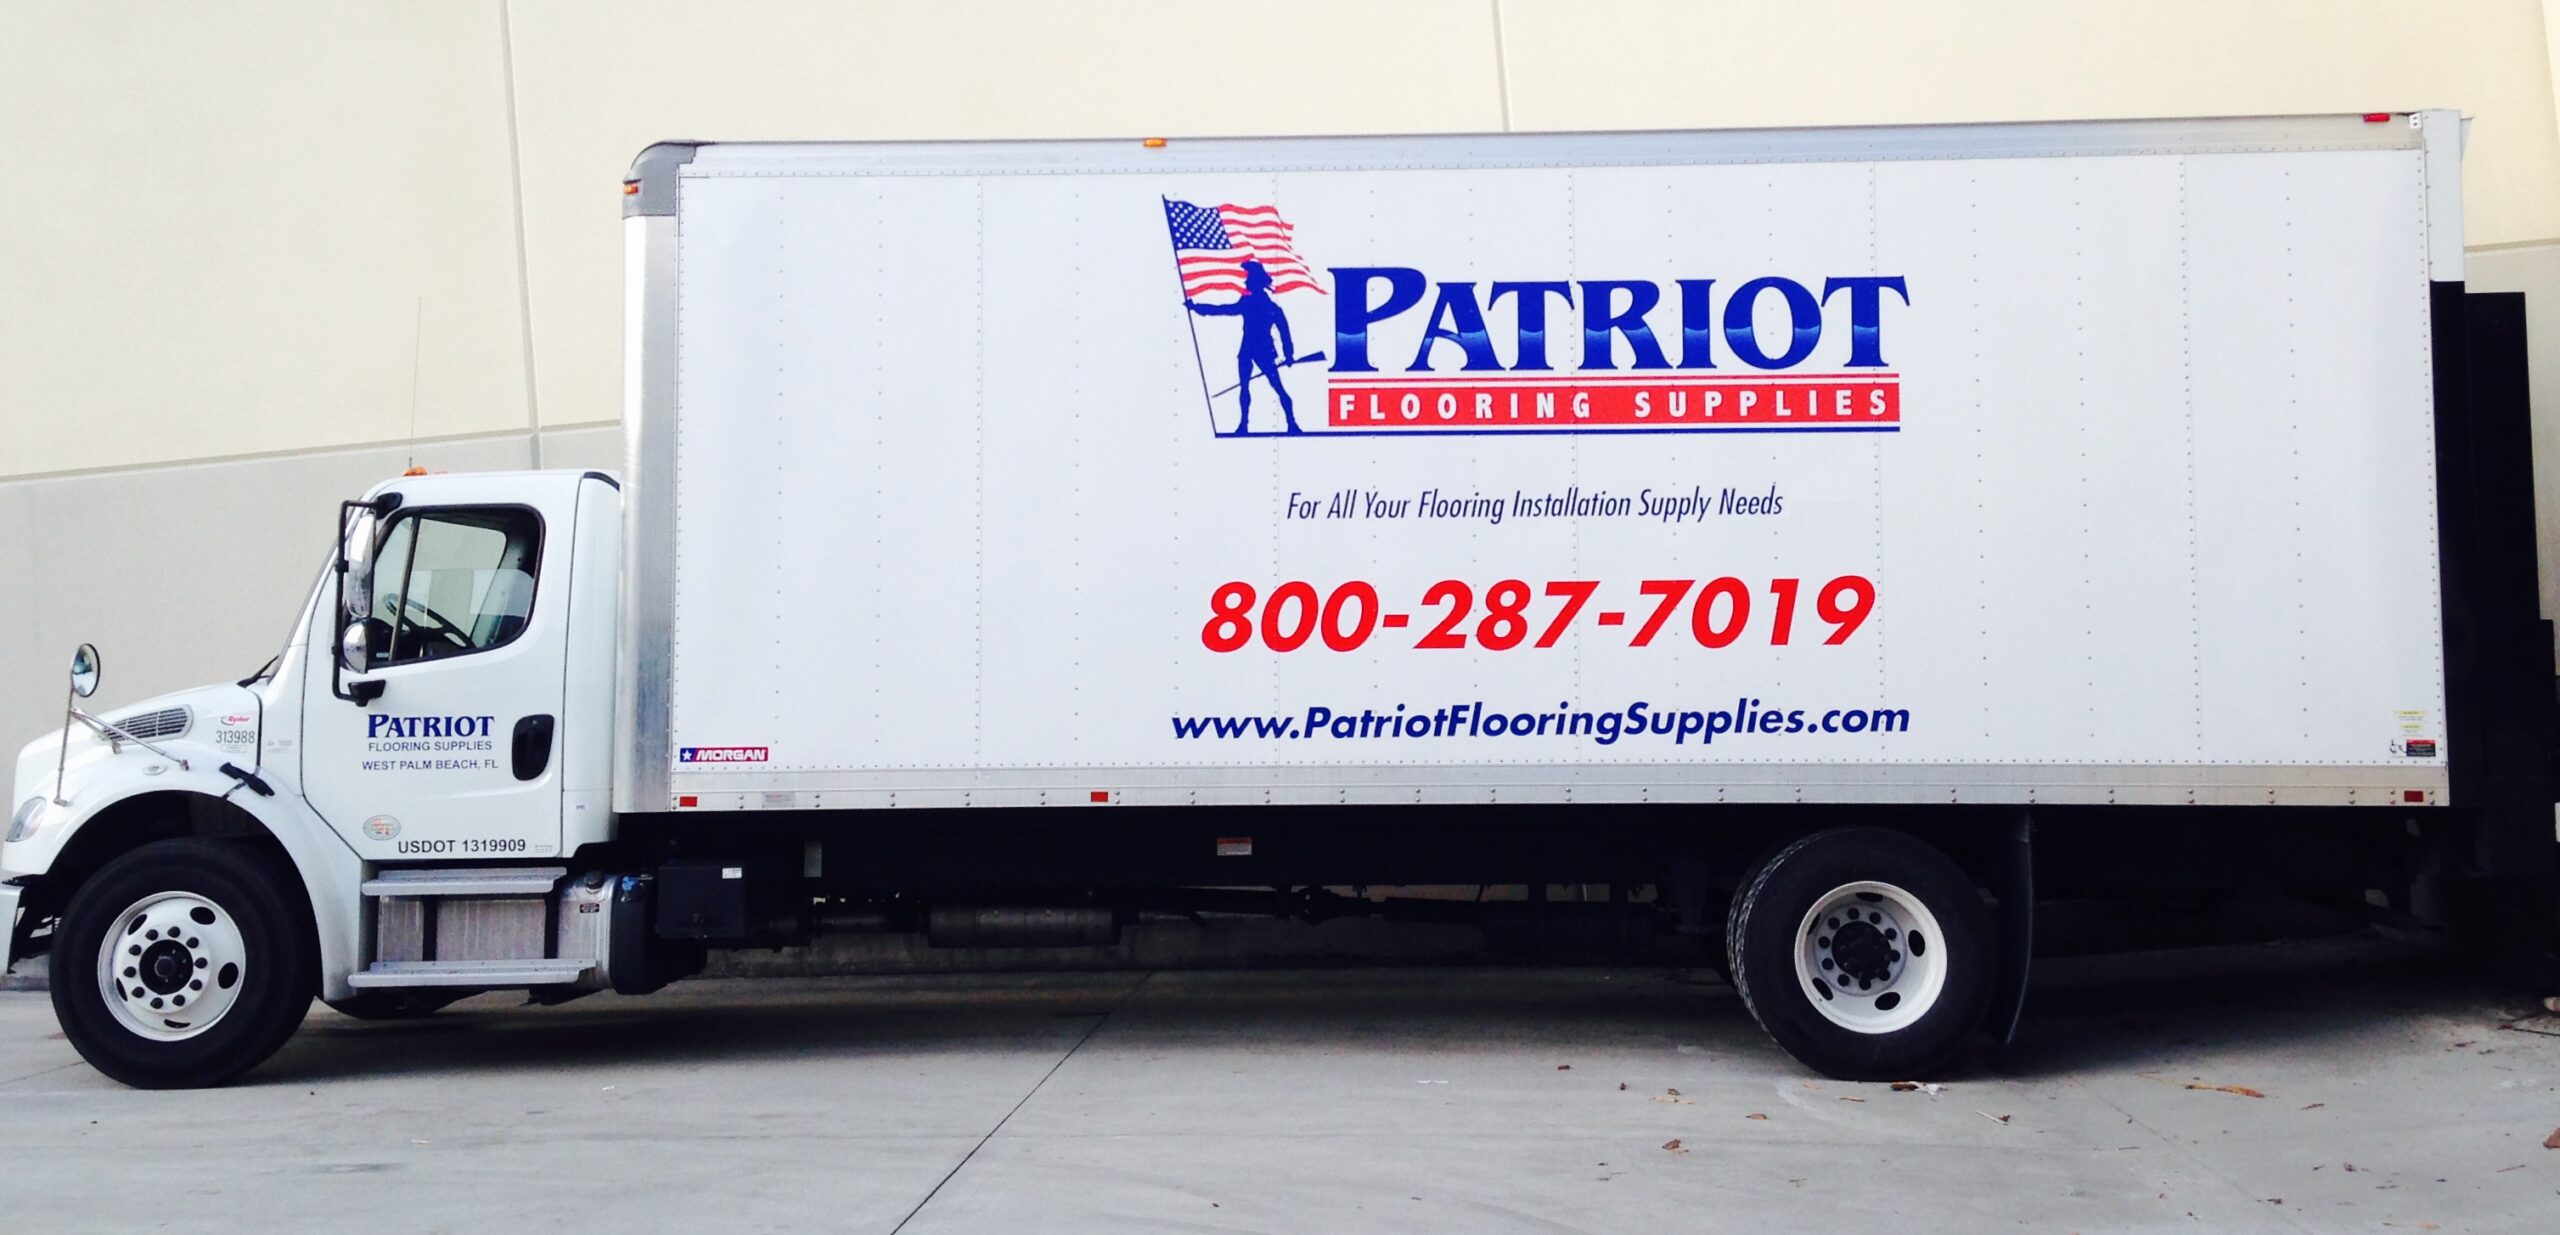 White delivery truck with Patriot Flooring Supplies branding